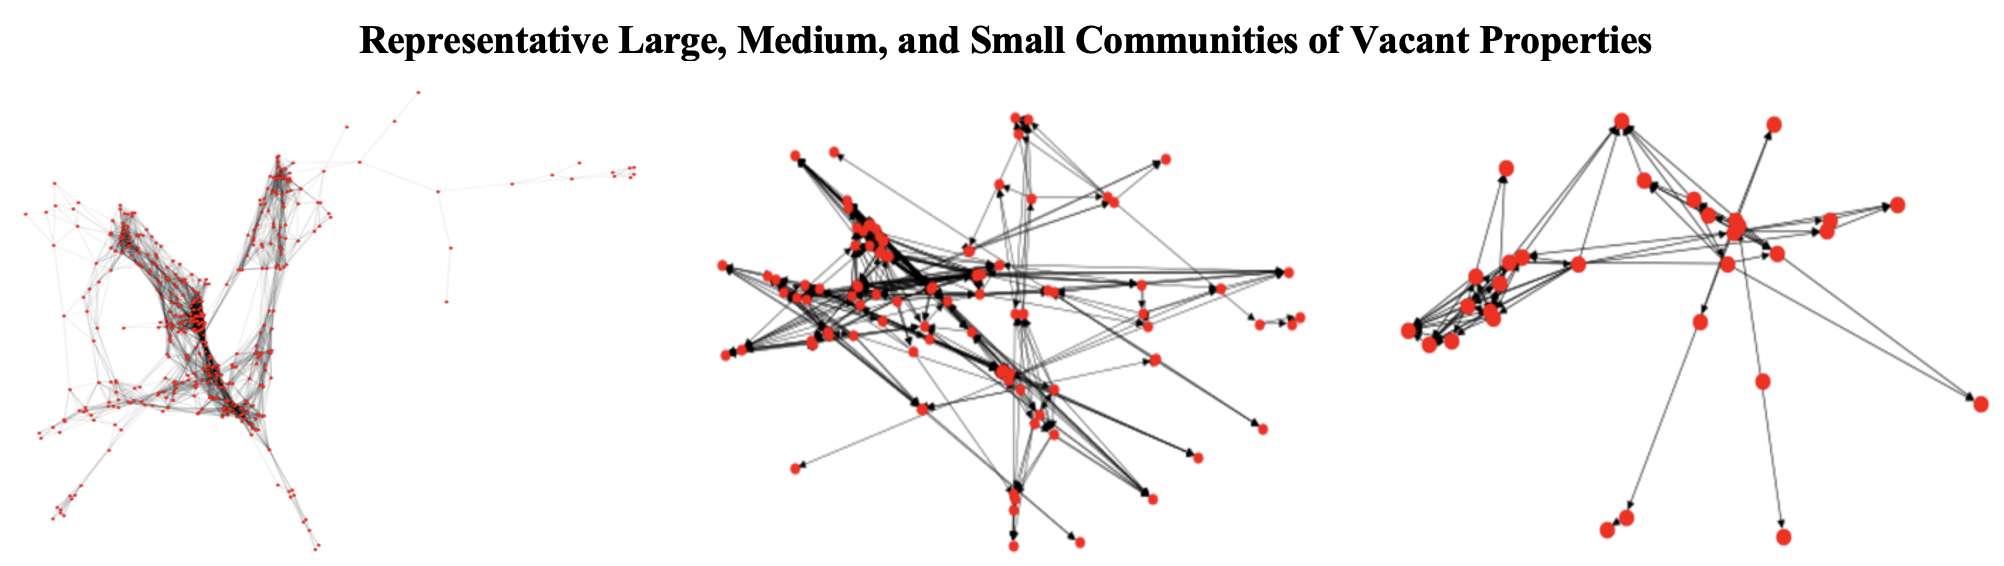 Large, Medium, and Small Network Graphs Representing Vacant Properties